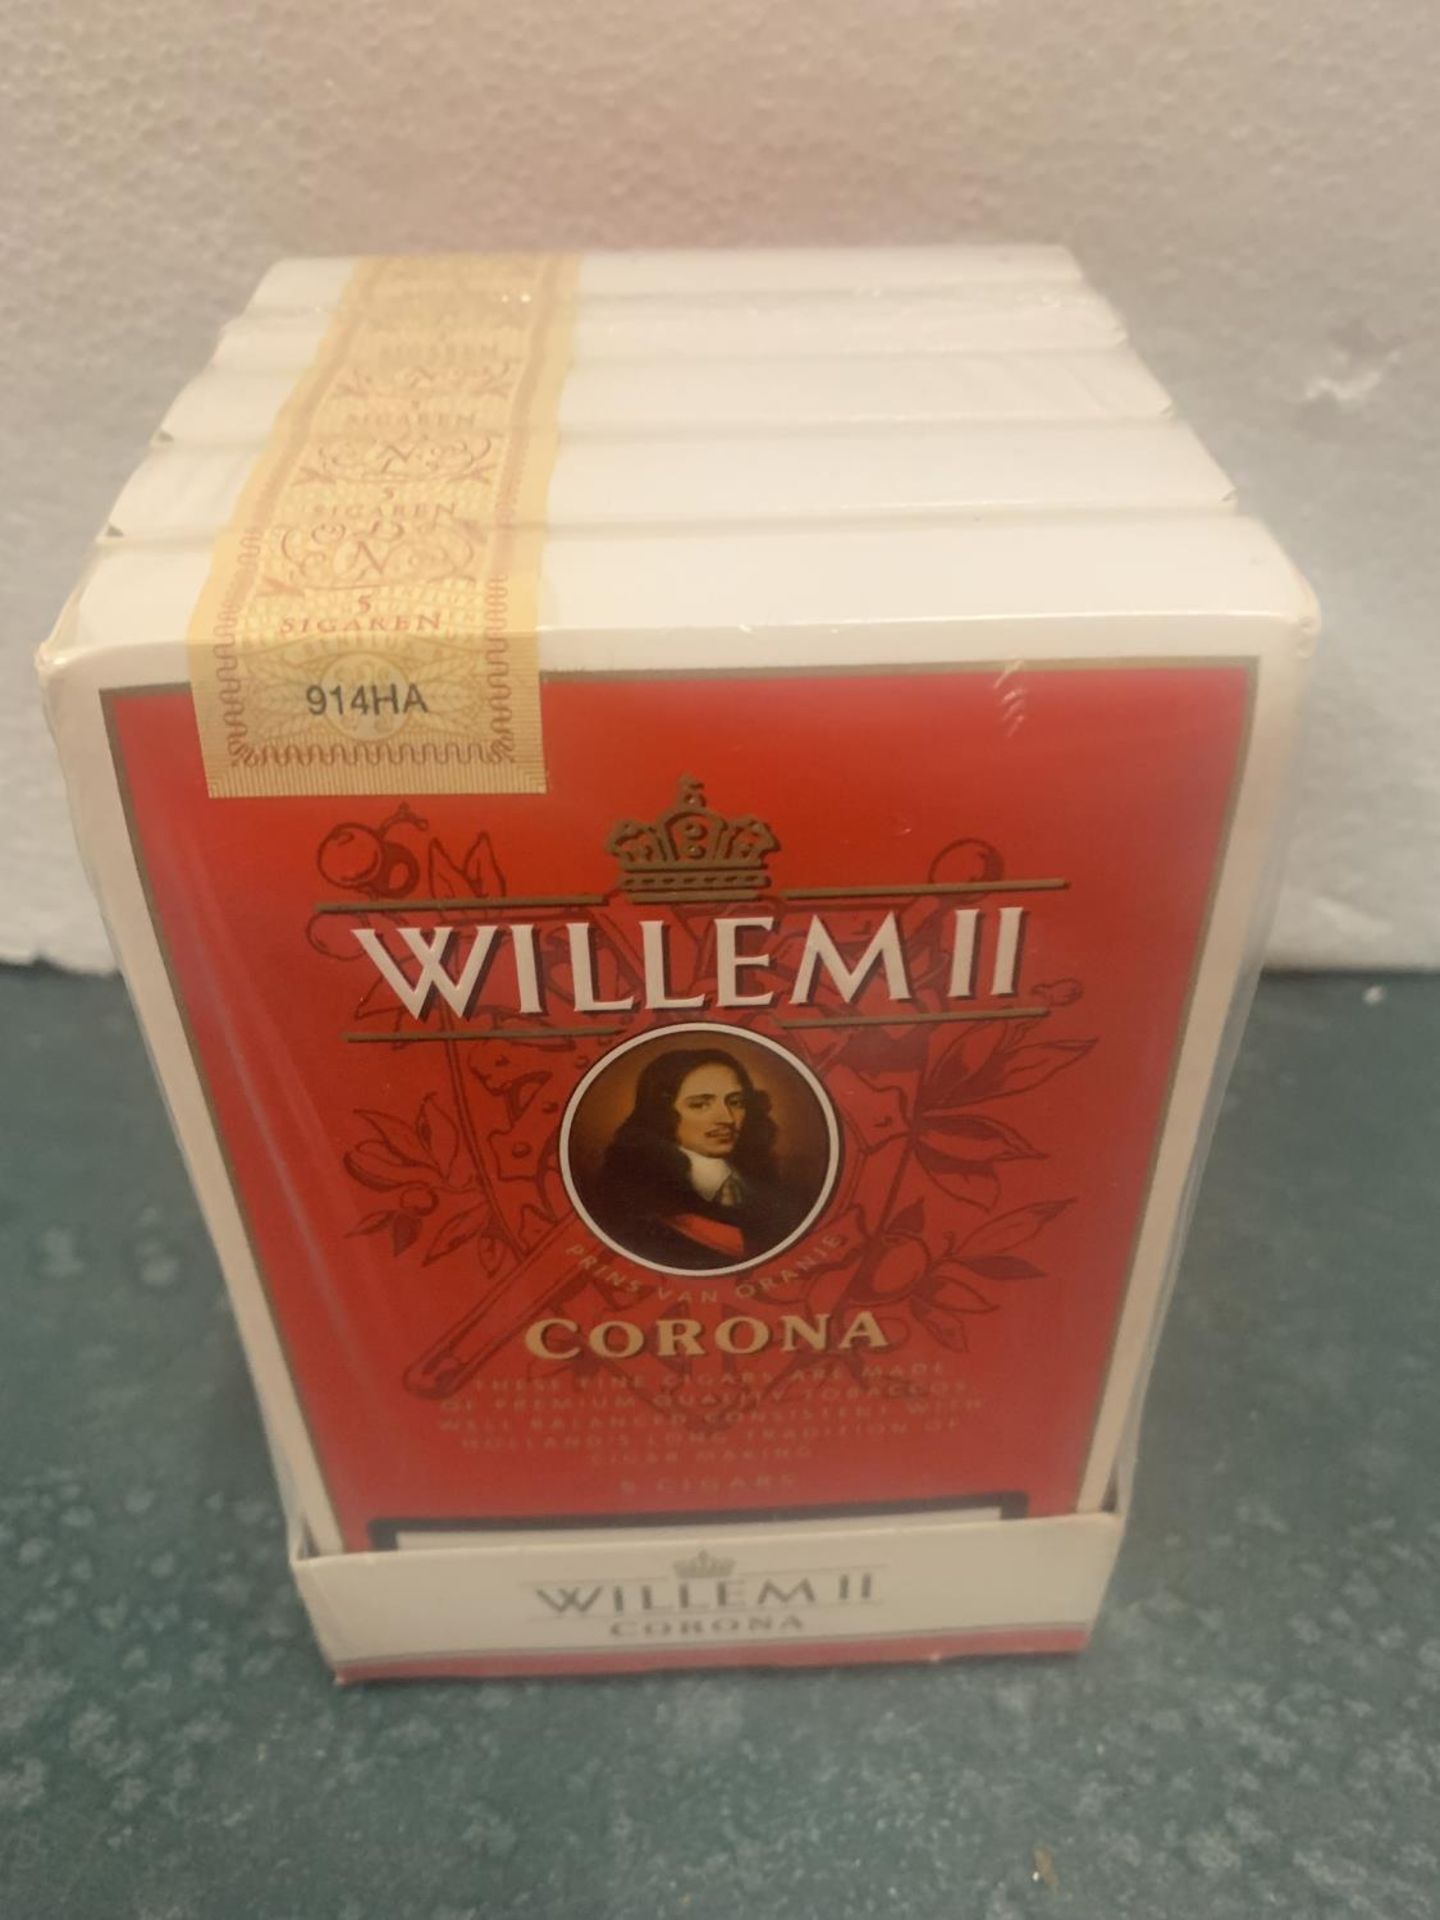 FIVE PACKETS EACH CONTAINING FIVE WILLEM II CIGARS